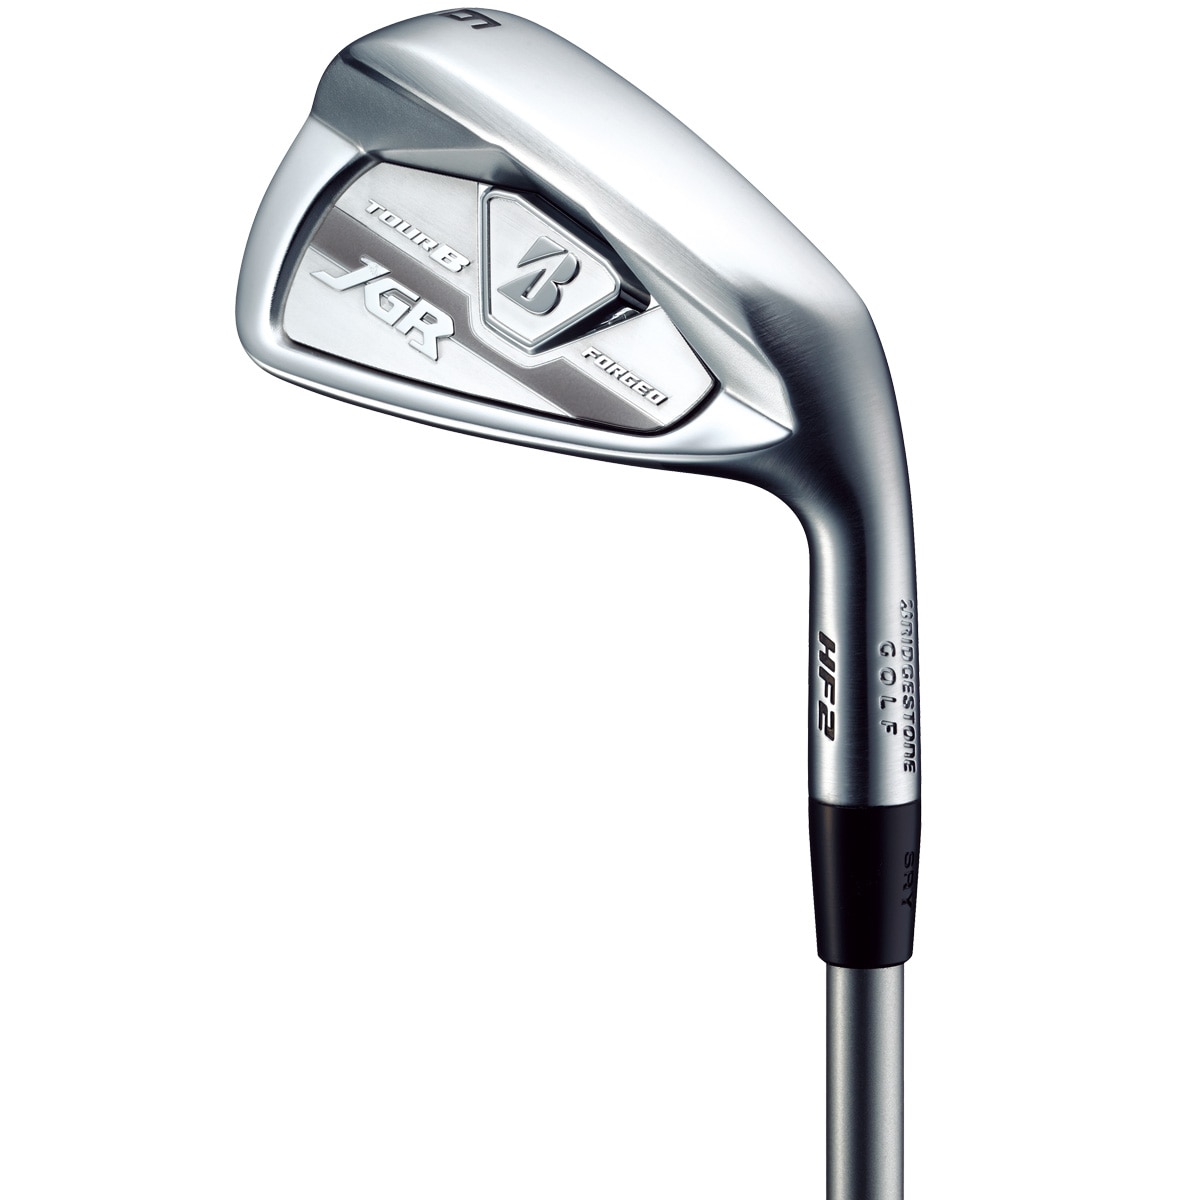 TOUR B JGR HF2 N.S.PRO 950GH アイアンセット-